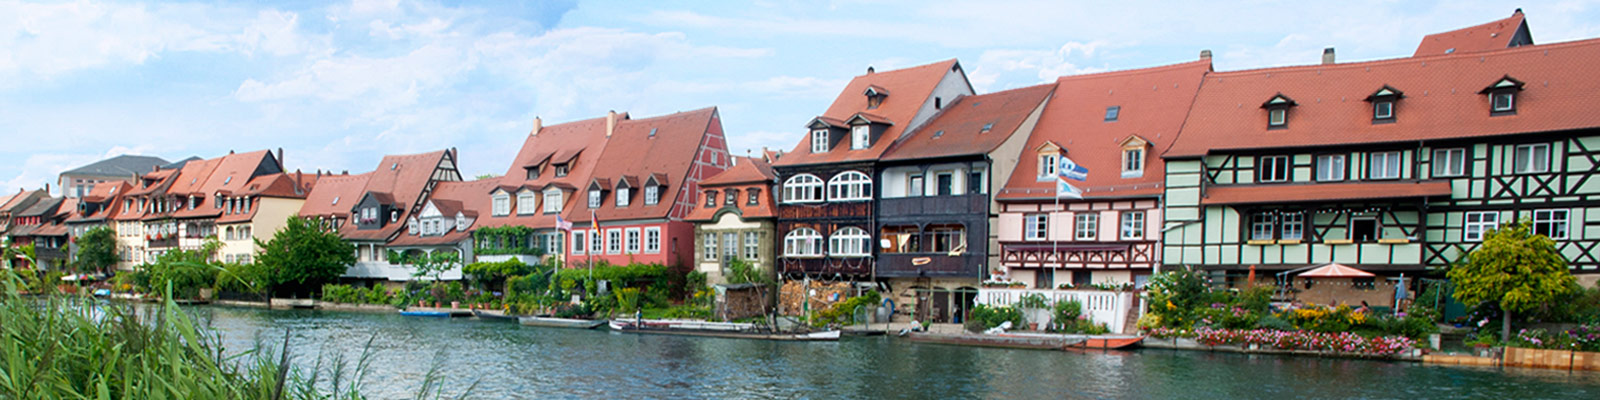 Houses lining canal in Germany